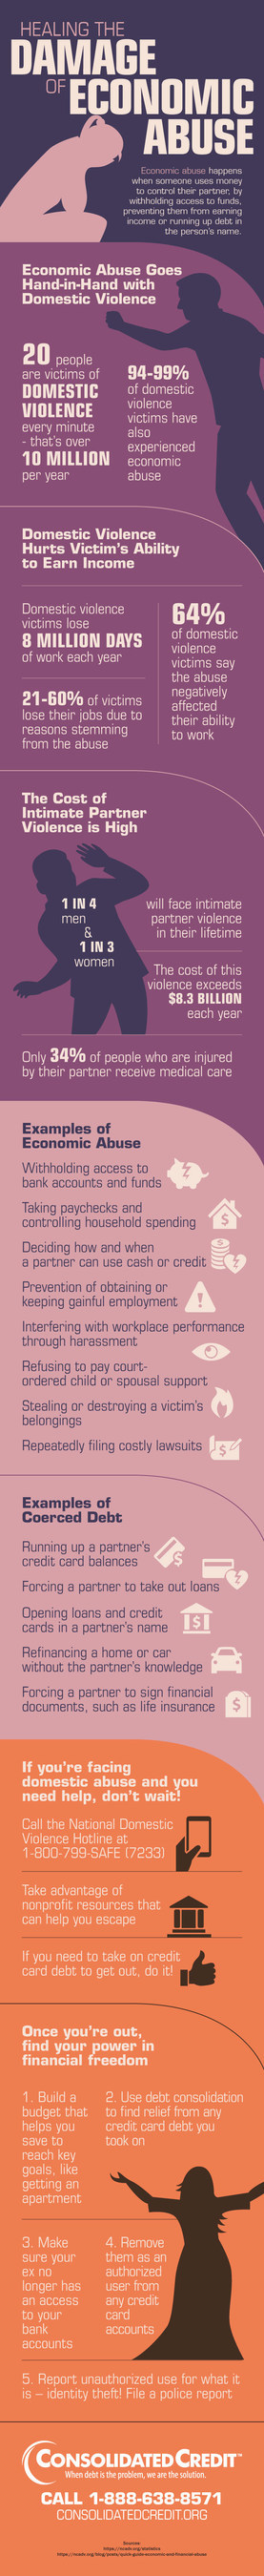 Economic Abuse and Domestic Violence: Consolidated Credit Explores the Impact